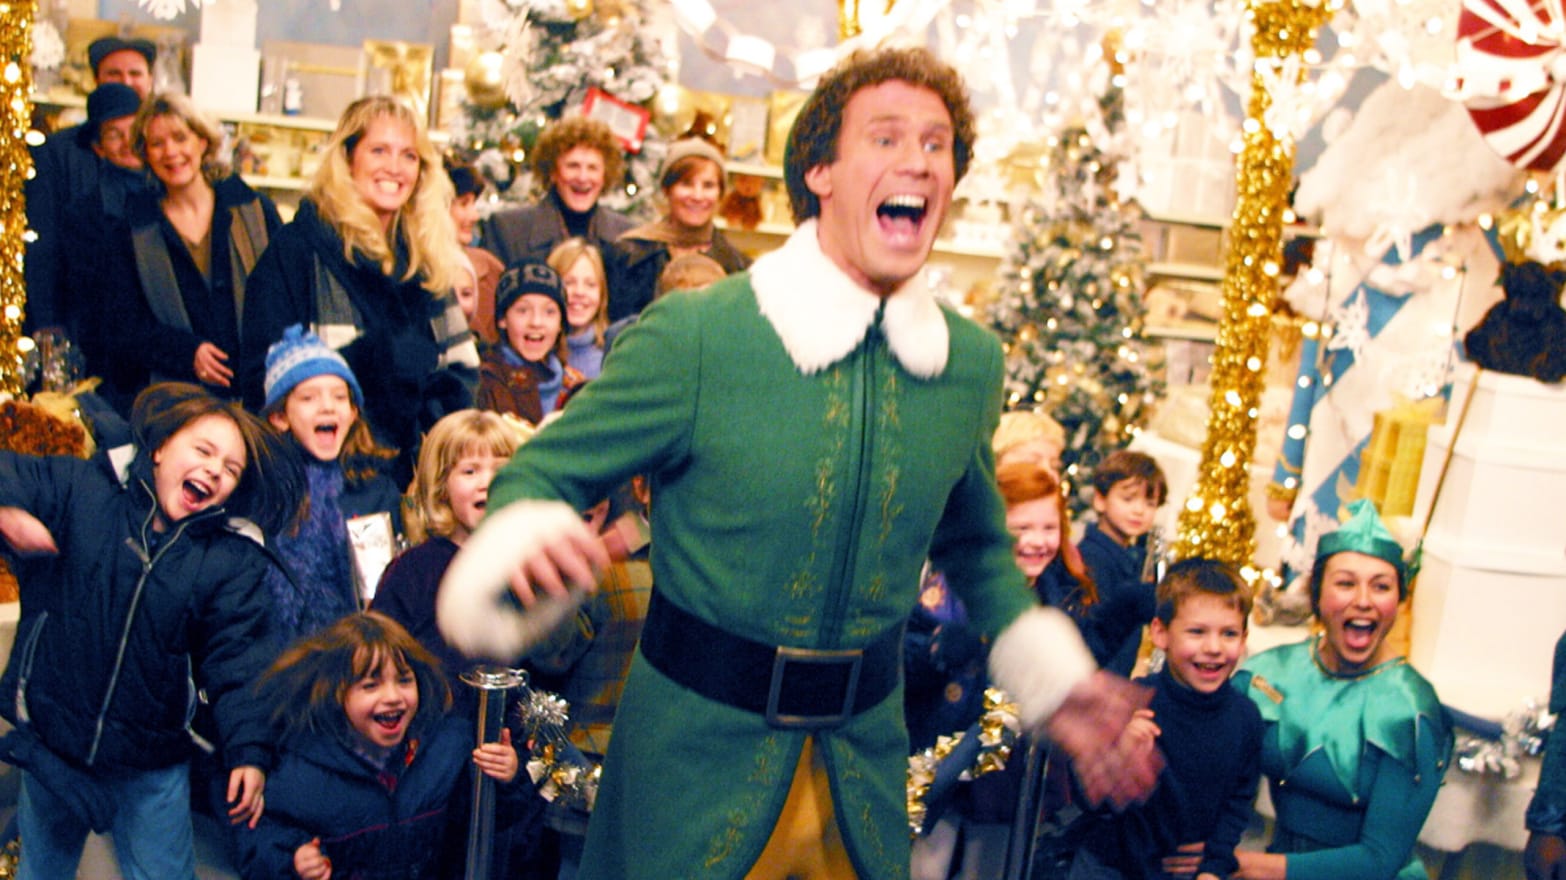 Elf is Returning to Theaters for Its 20th Anniversary and Son of A Nutcracker, I’m Going